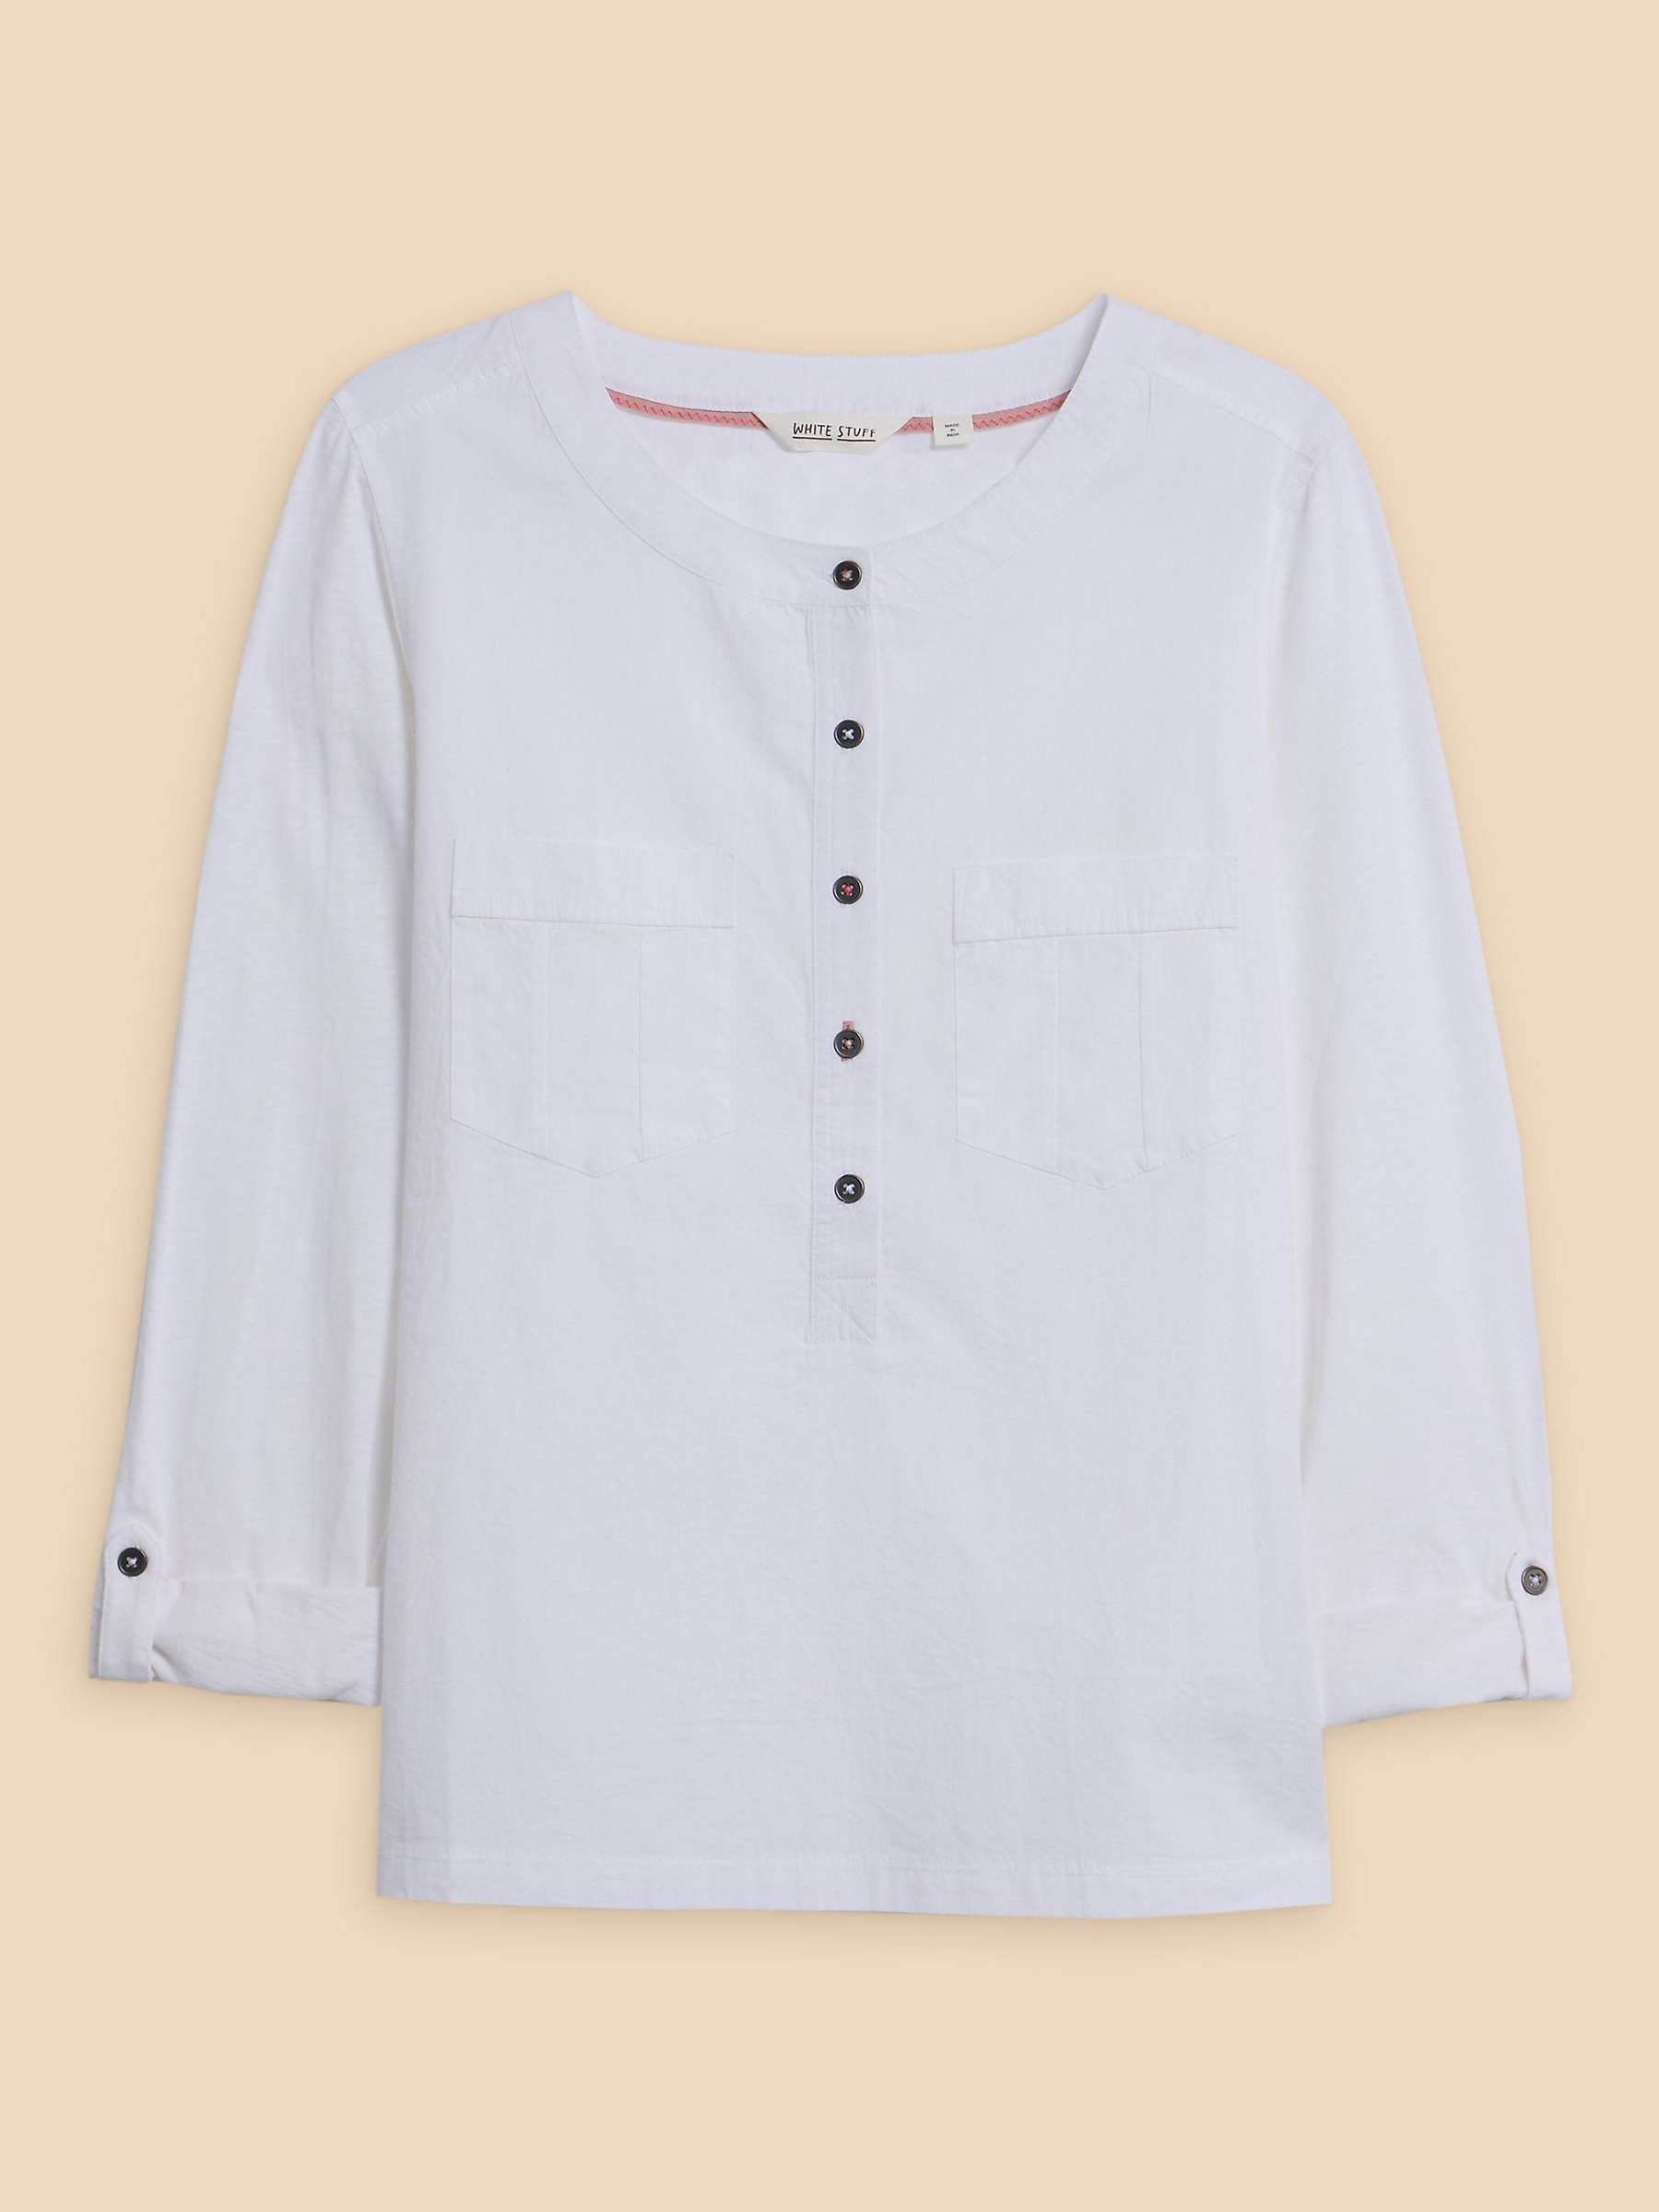 Buy White Stuff Macley Mix Cotton Shirt, Pale Ivory Online at johnlewis.com